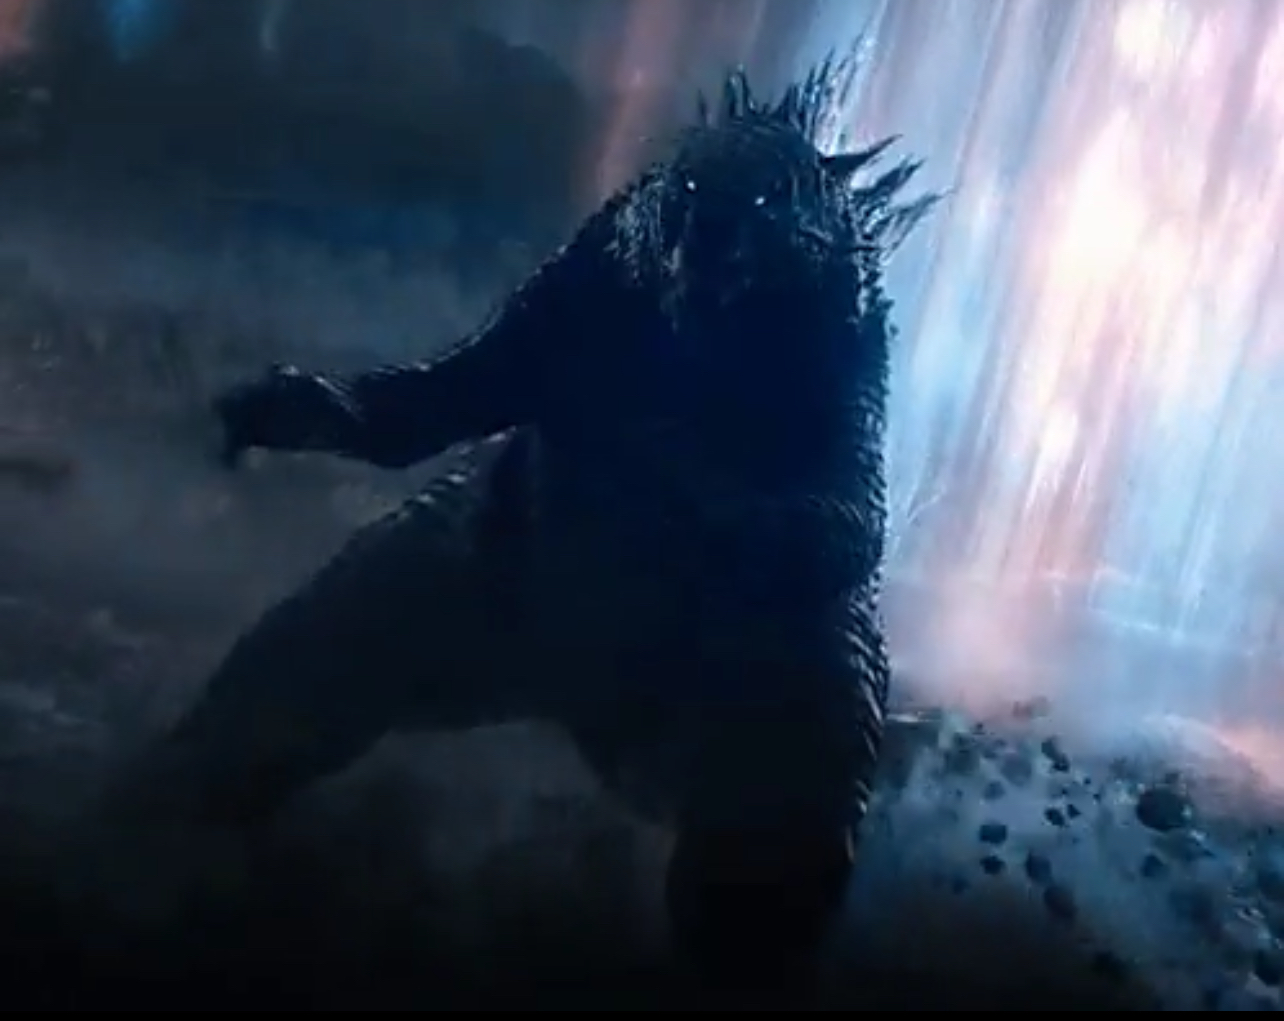 Godzilla in Legacy of Monsters